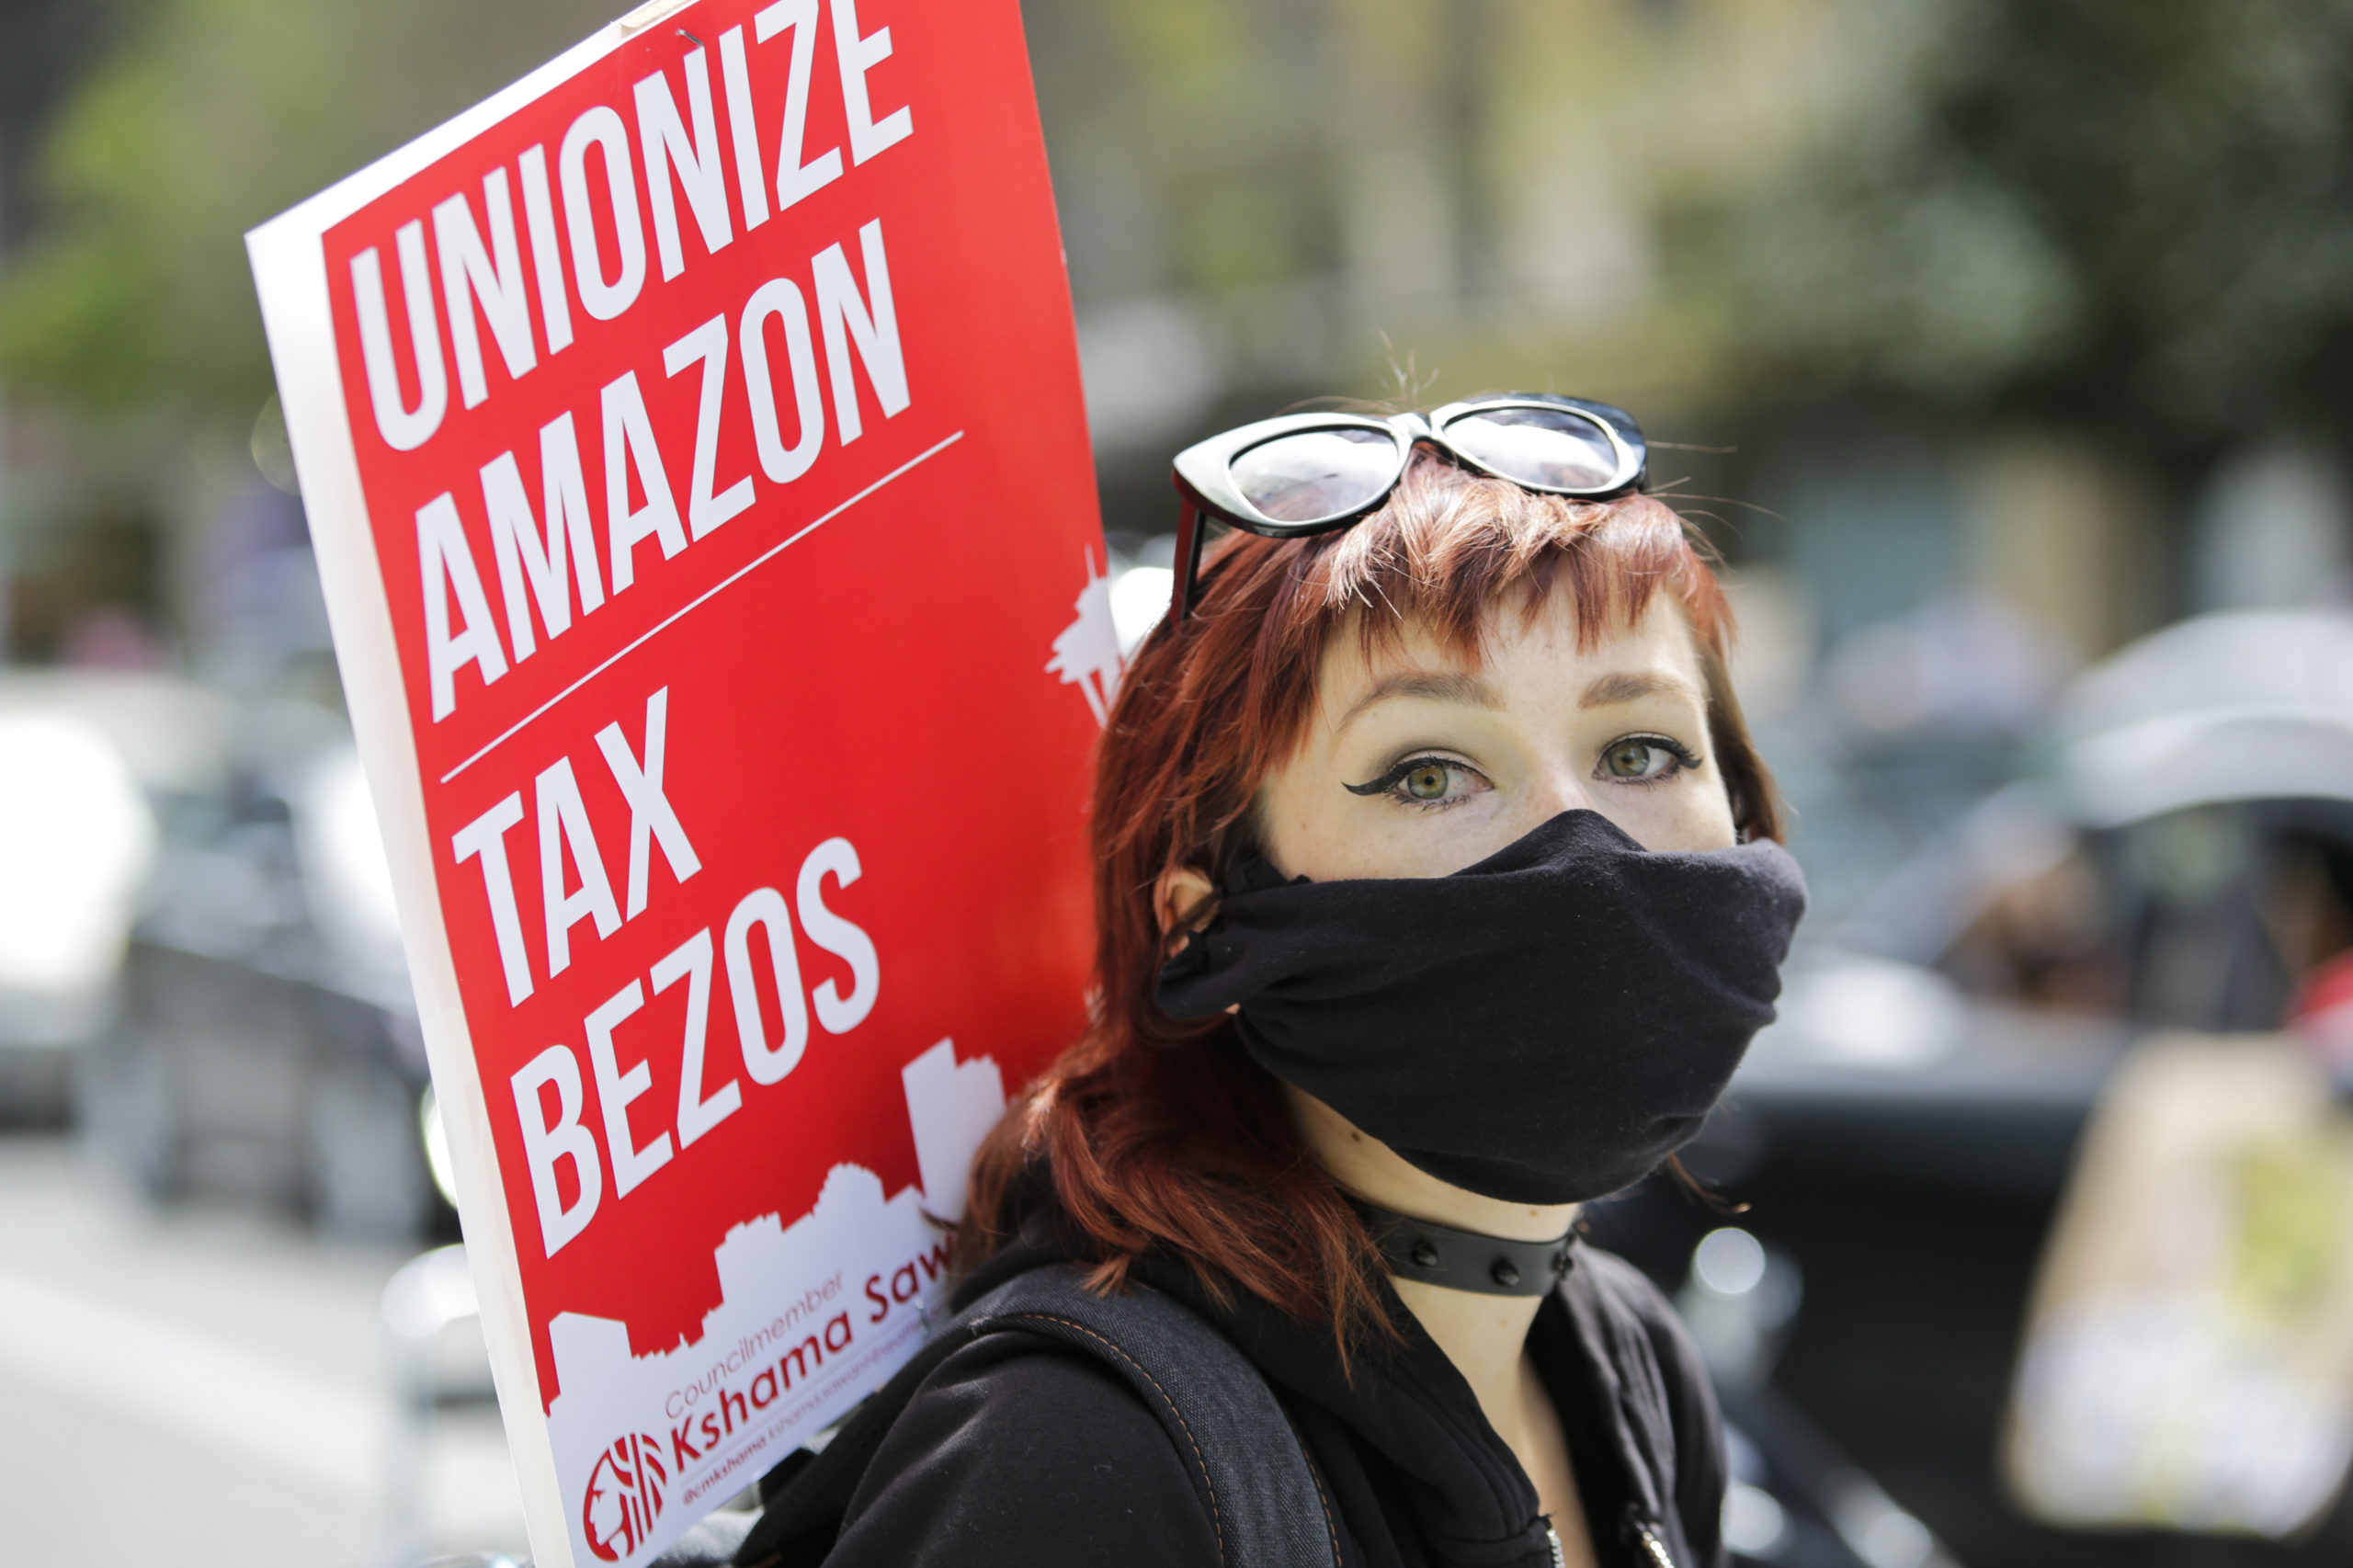 Protesters wearing face masks participate in a protest at the Amazon Spheres to demand the Seattle City Council tax the city's largest businesses in Seattle, Washington on May 1, 2020. (Jason Redmond/AFP via Getty Images)